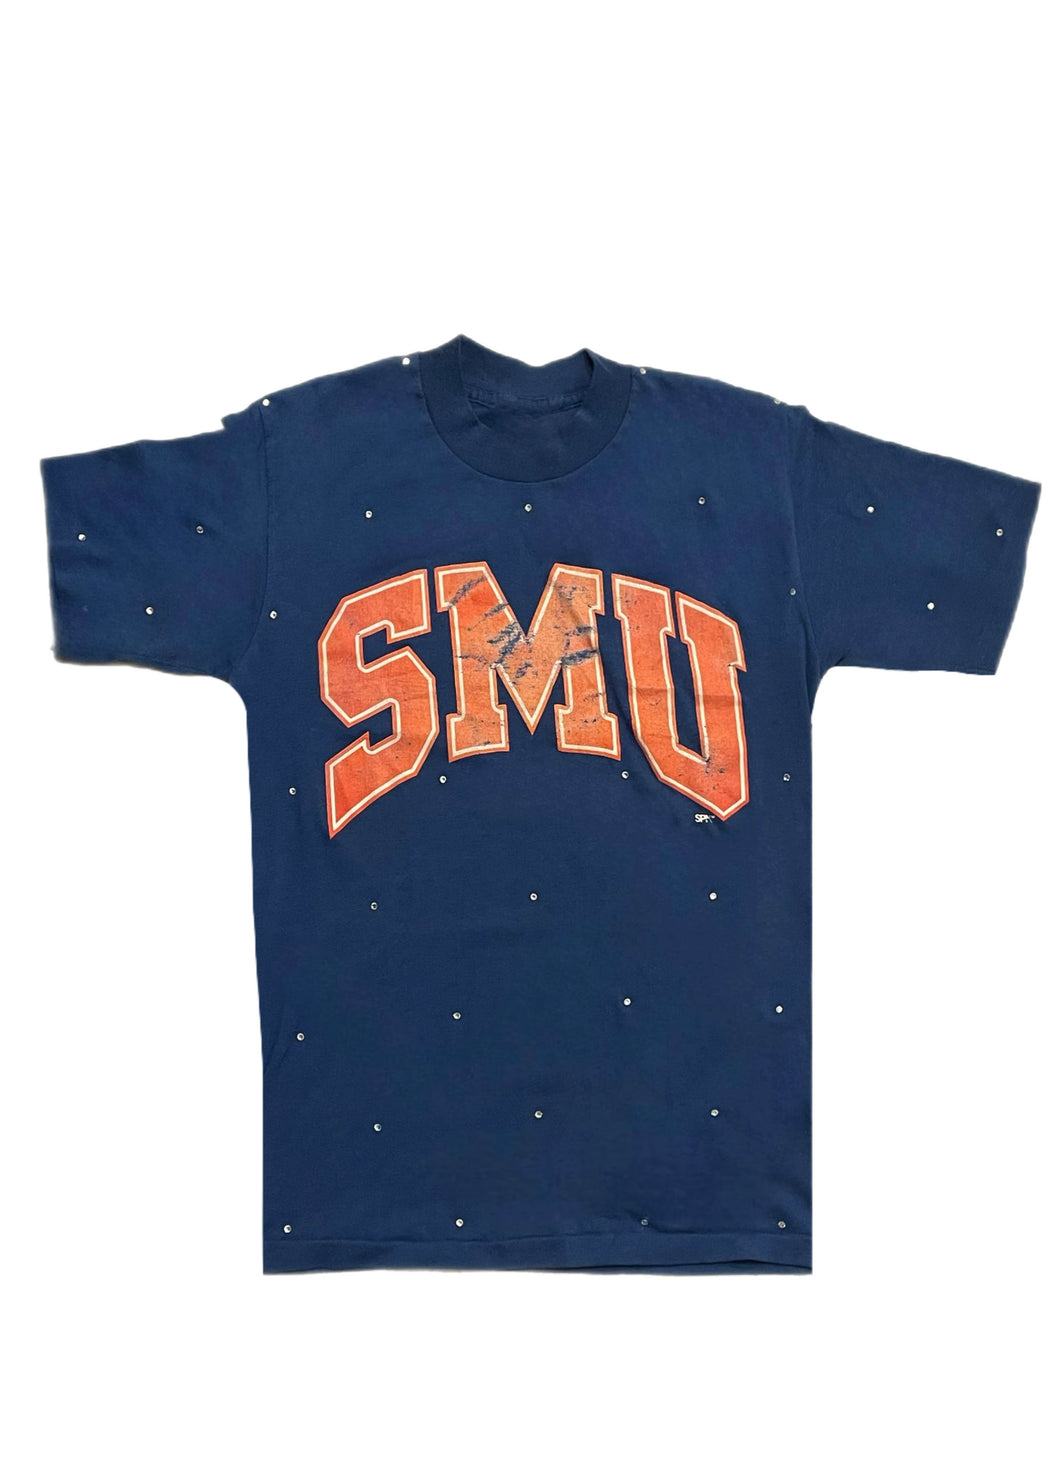 Southern Methodist University, One of a KIND Vintage SMU T-Shirt with All Over Crystal Design